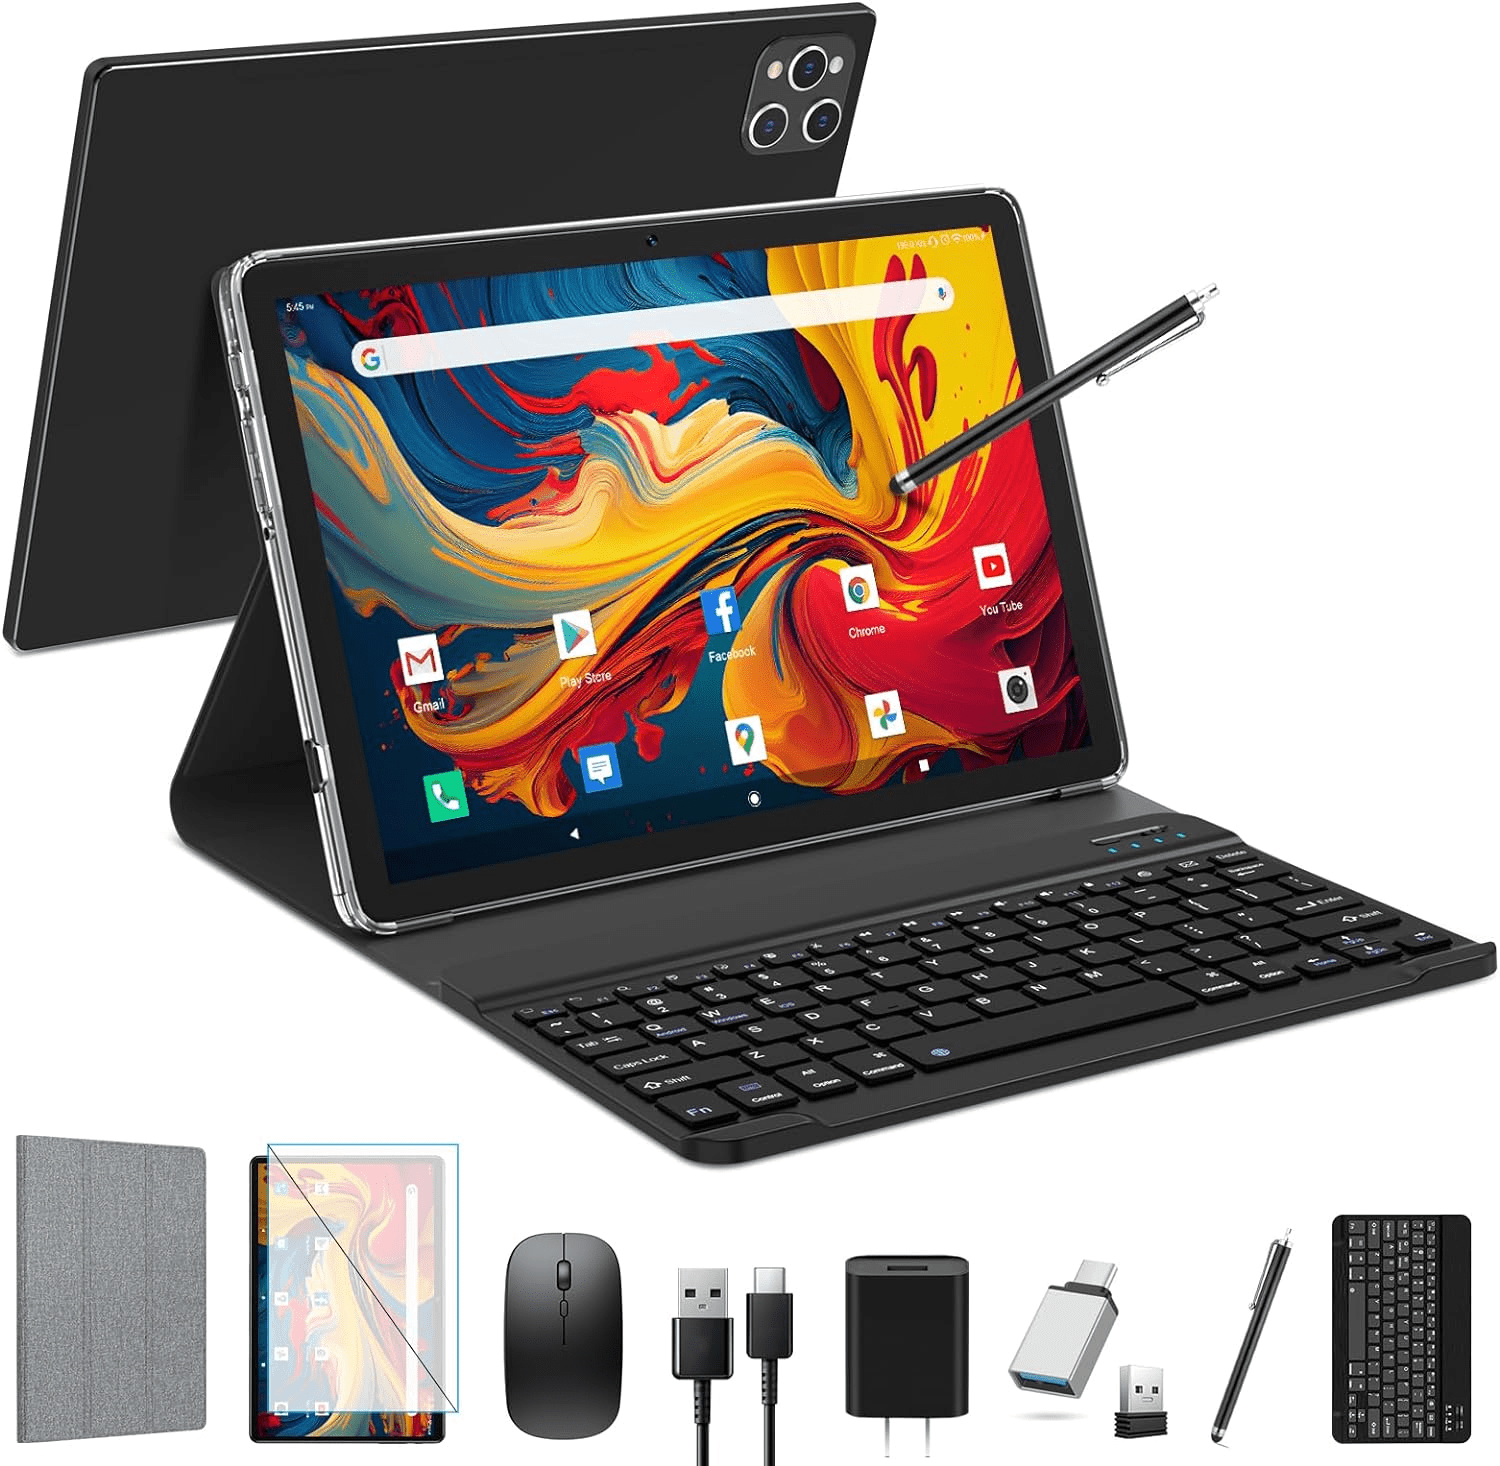 Tablet Android 13 Tablet,10 Inch Android Tablet with Keyboard,5G WiFi Tablet ,128GB ROM+16GB RAM (8+8Virtual) +1TB TF Expand,Octa-Core Processor,13MP+8MP  Camera,Bluetooth,GPS, FHD Display,2 In 1 Tablet 